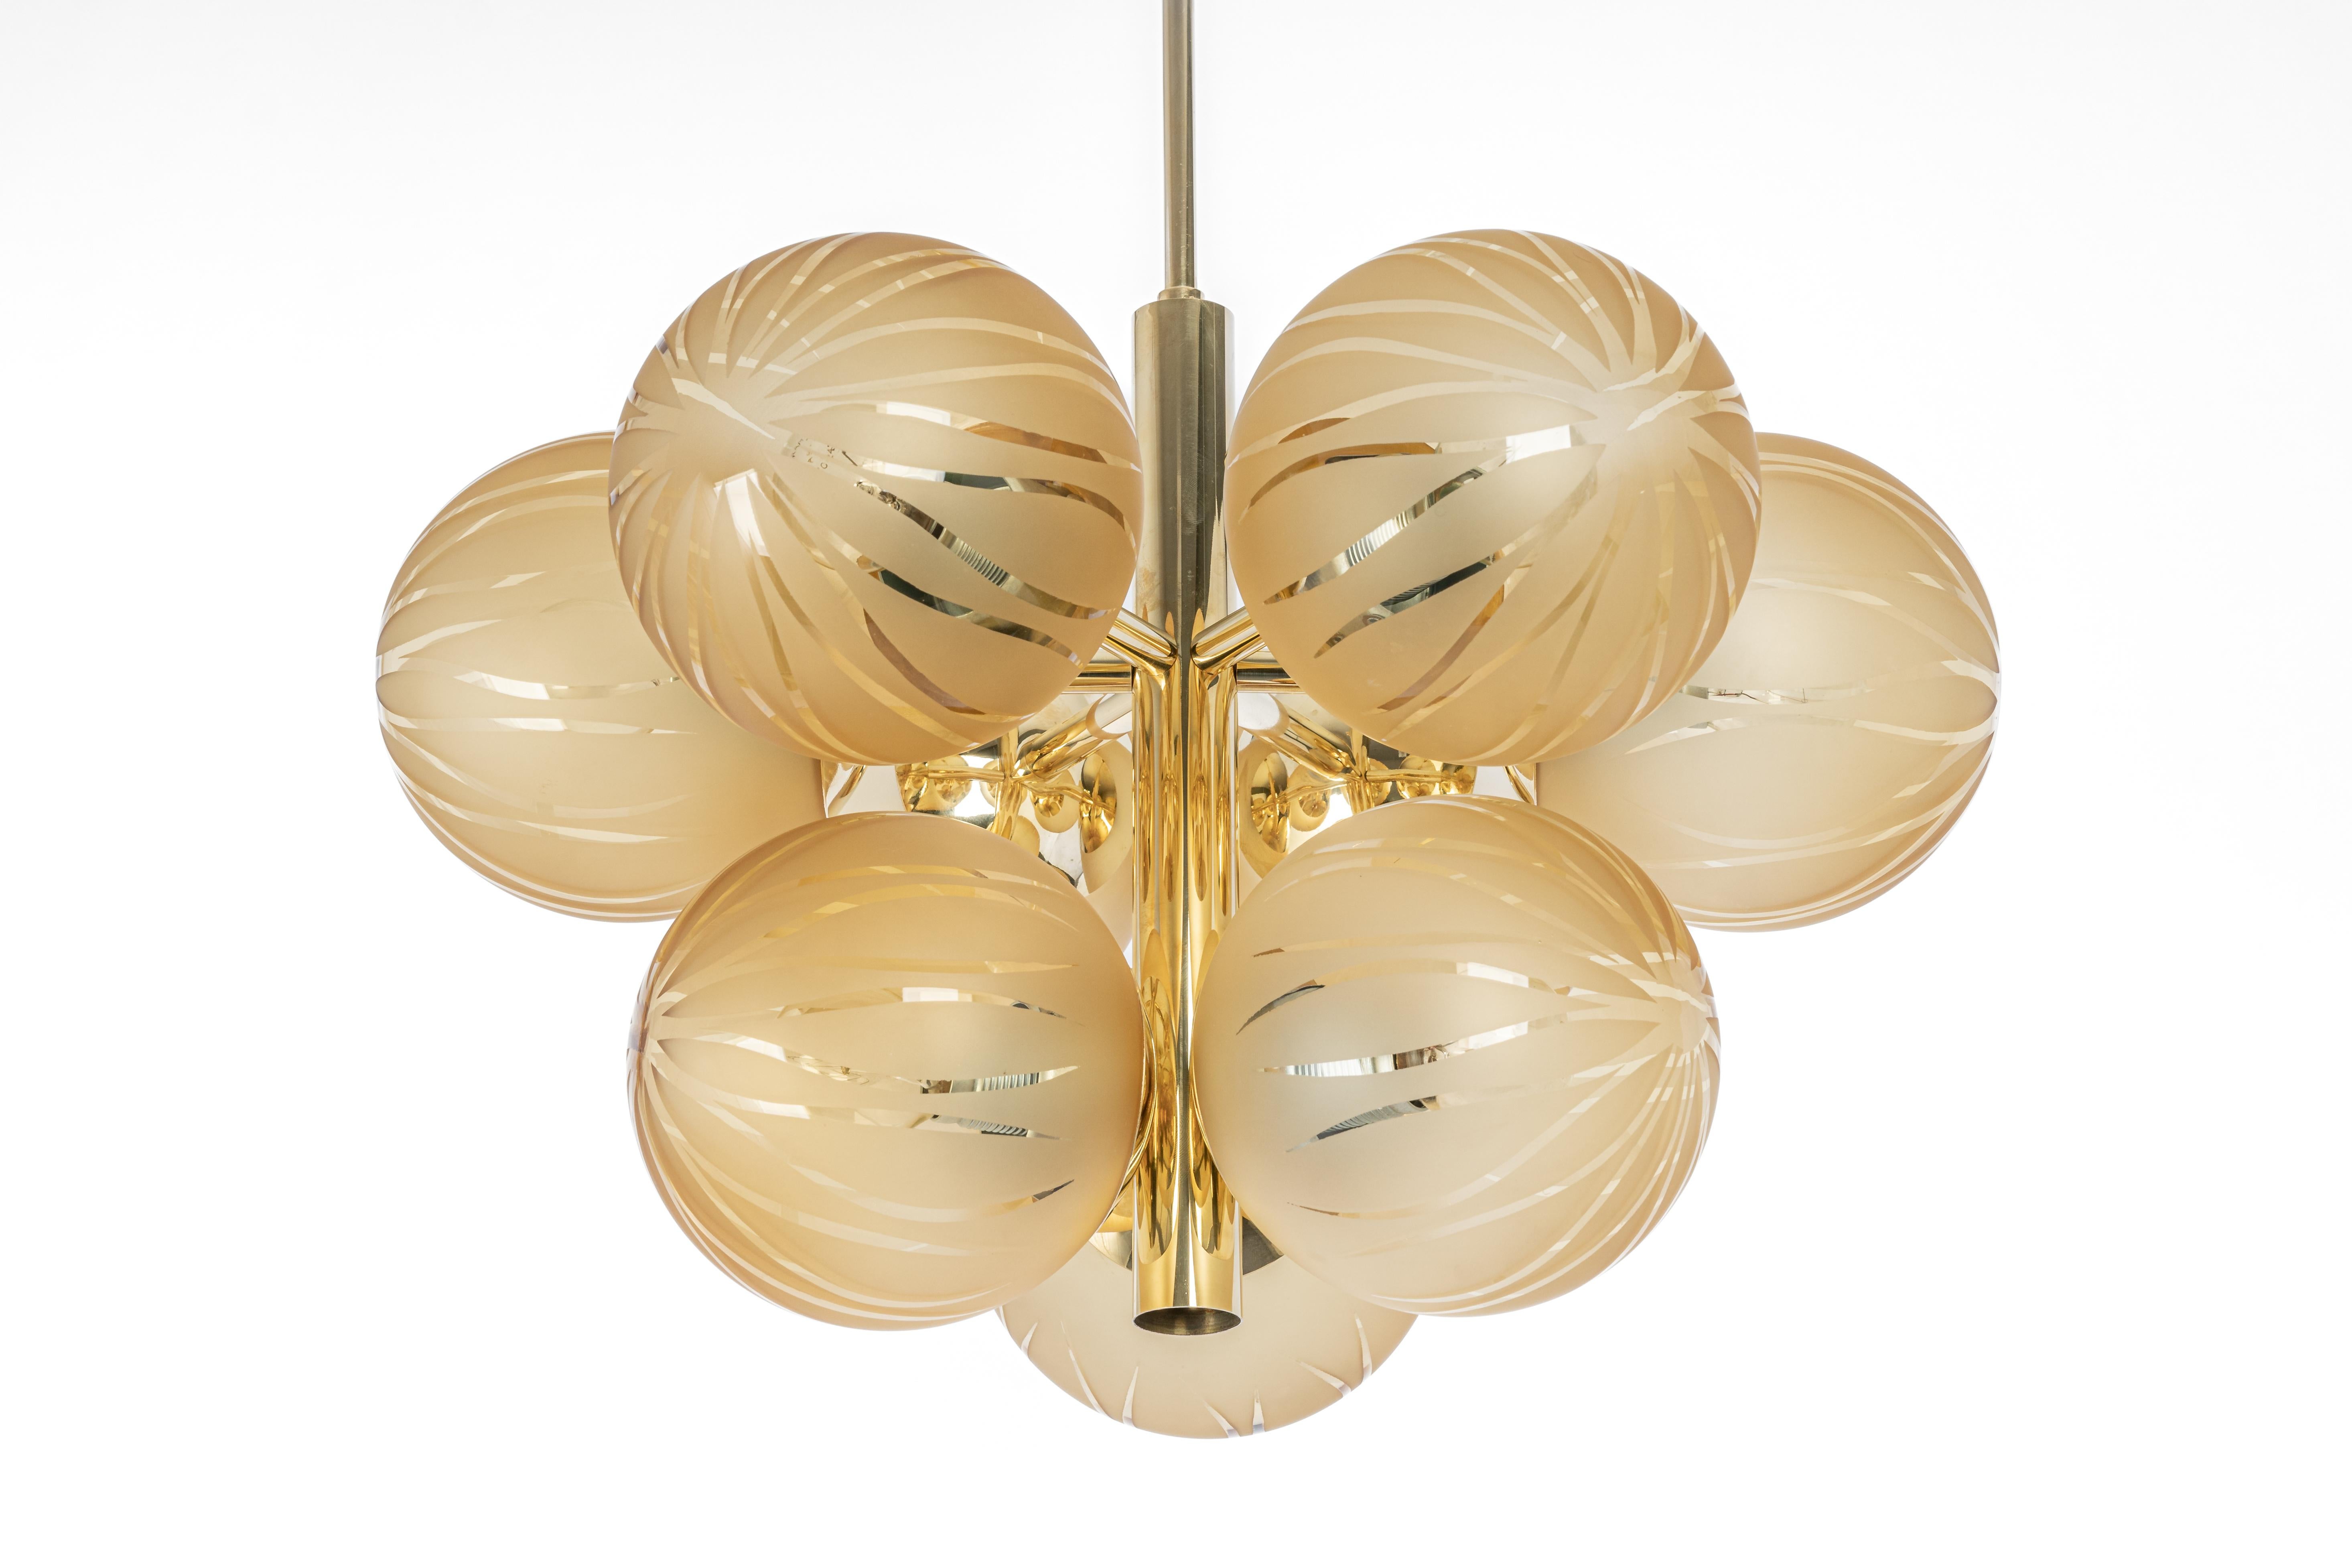 Stunning Sputnik brass chandelier with 8 glass globes by Kaiser Leuchten, Germany, 1970s.
High quality and in very good condition. Cleaned, well-wired, and ready to use. 

The fixture requires 8 x E14 standard bulbs with 40W max each.
Light